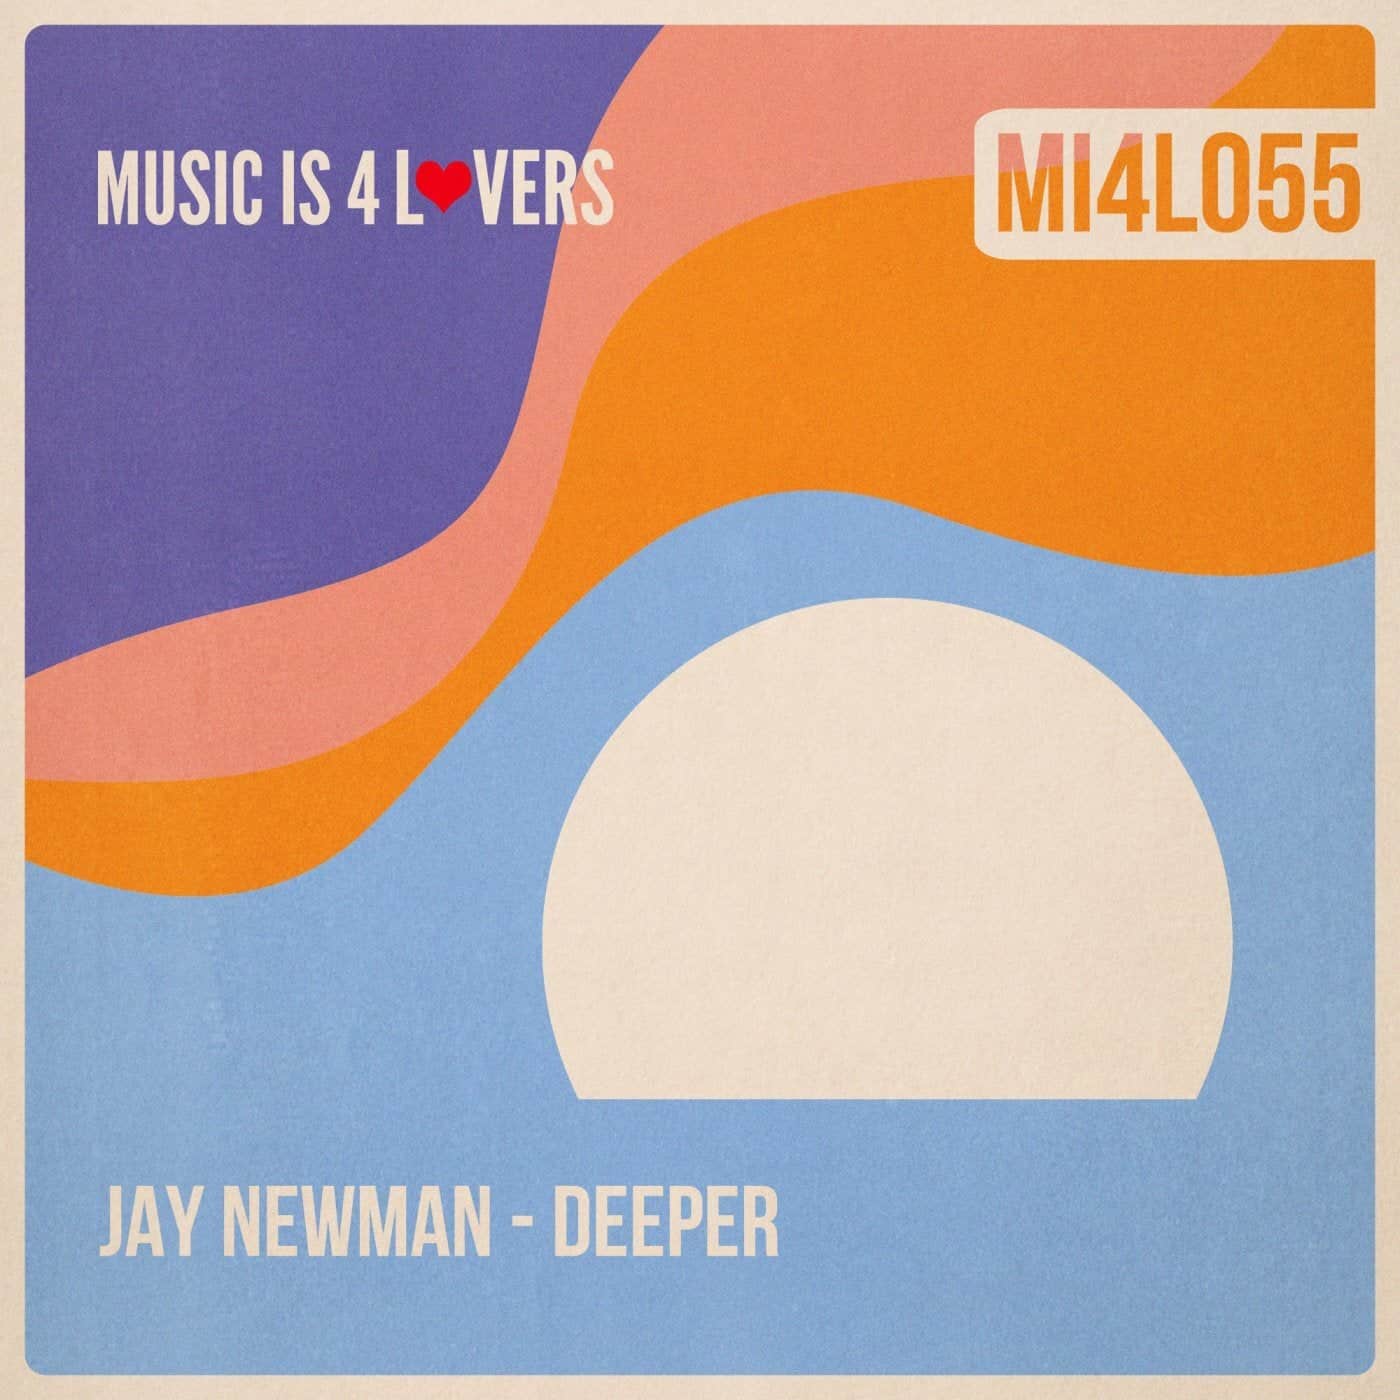 Download Jay Newman - Deeper on Electrobuzz